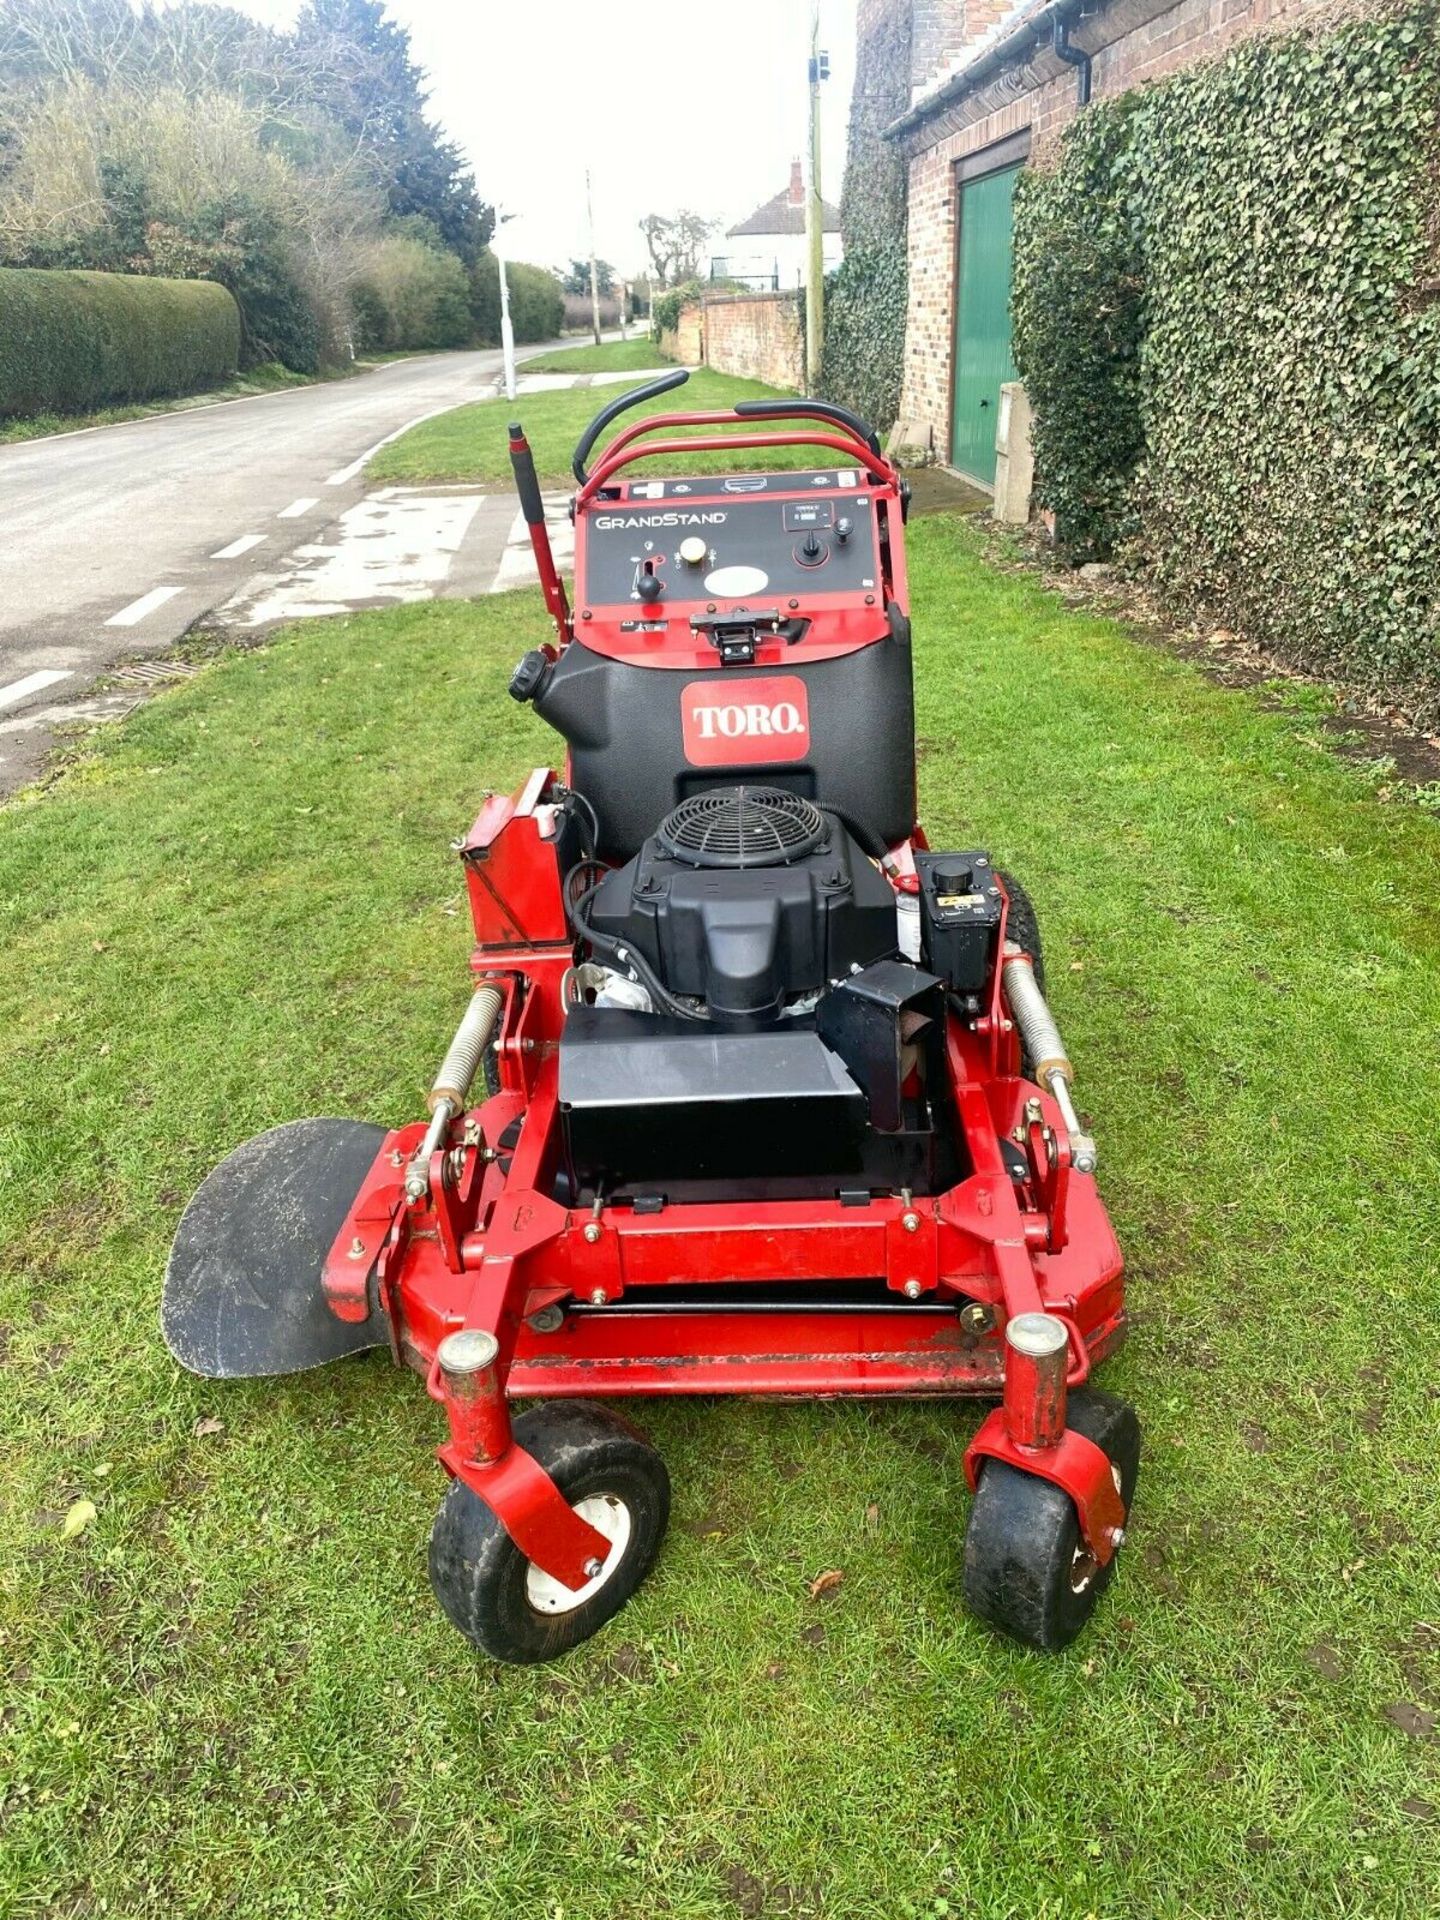 TORO GRANDSTAND STAND ON MOWER, ZERO TURN, 620 HOURS FROM NEW, MANUFACTURED YEAR 2015. - Image 6 of 6